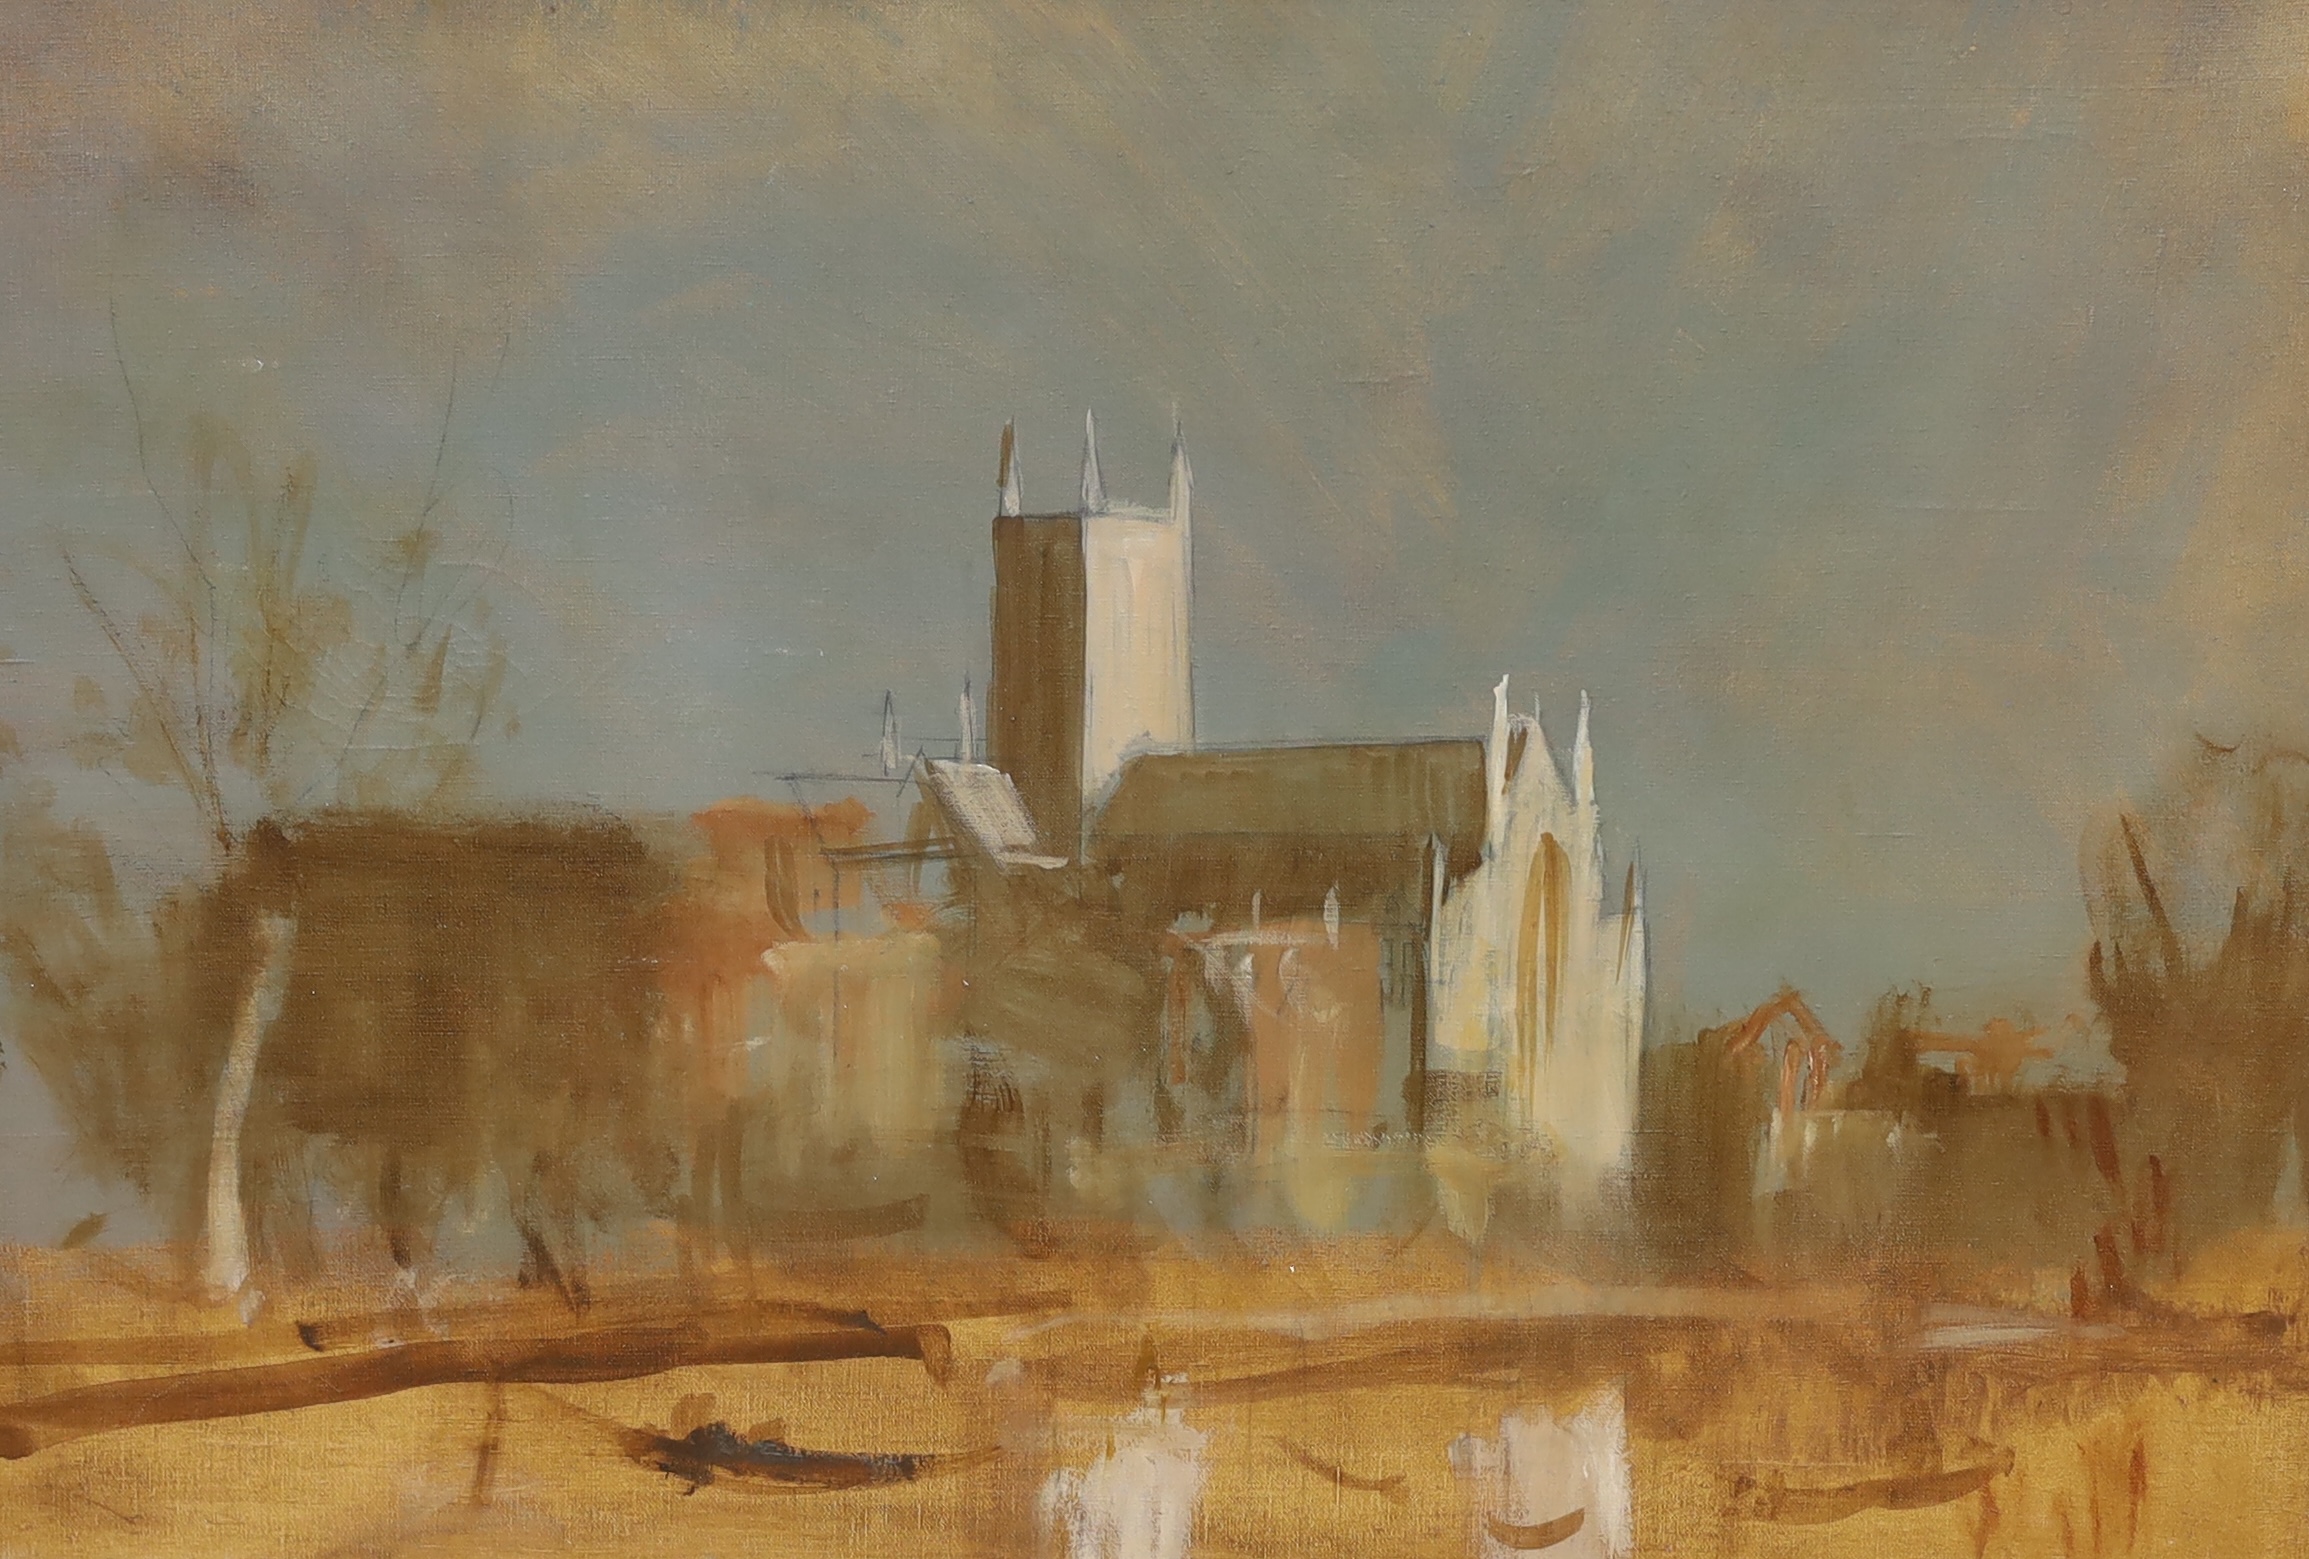 Follower of Edward Seago, oil on canvas, Study of a church, 51 x 76cm, unframed. Condition - fair, some craquelure and surface dirt to the canvas